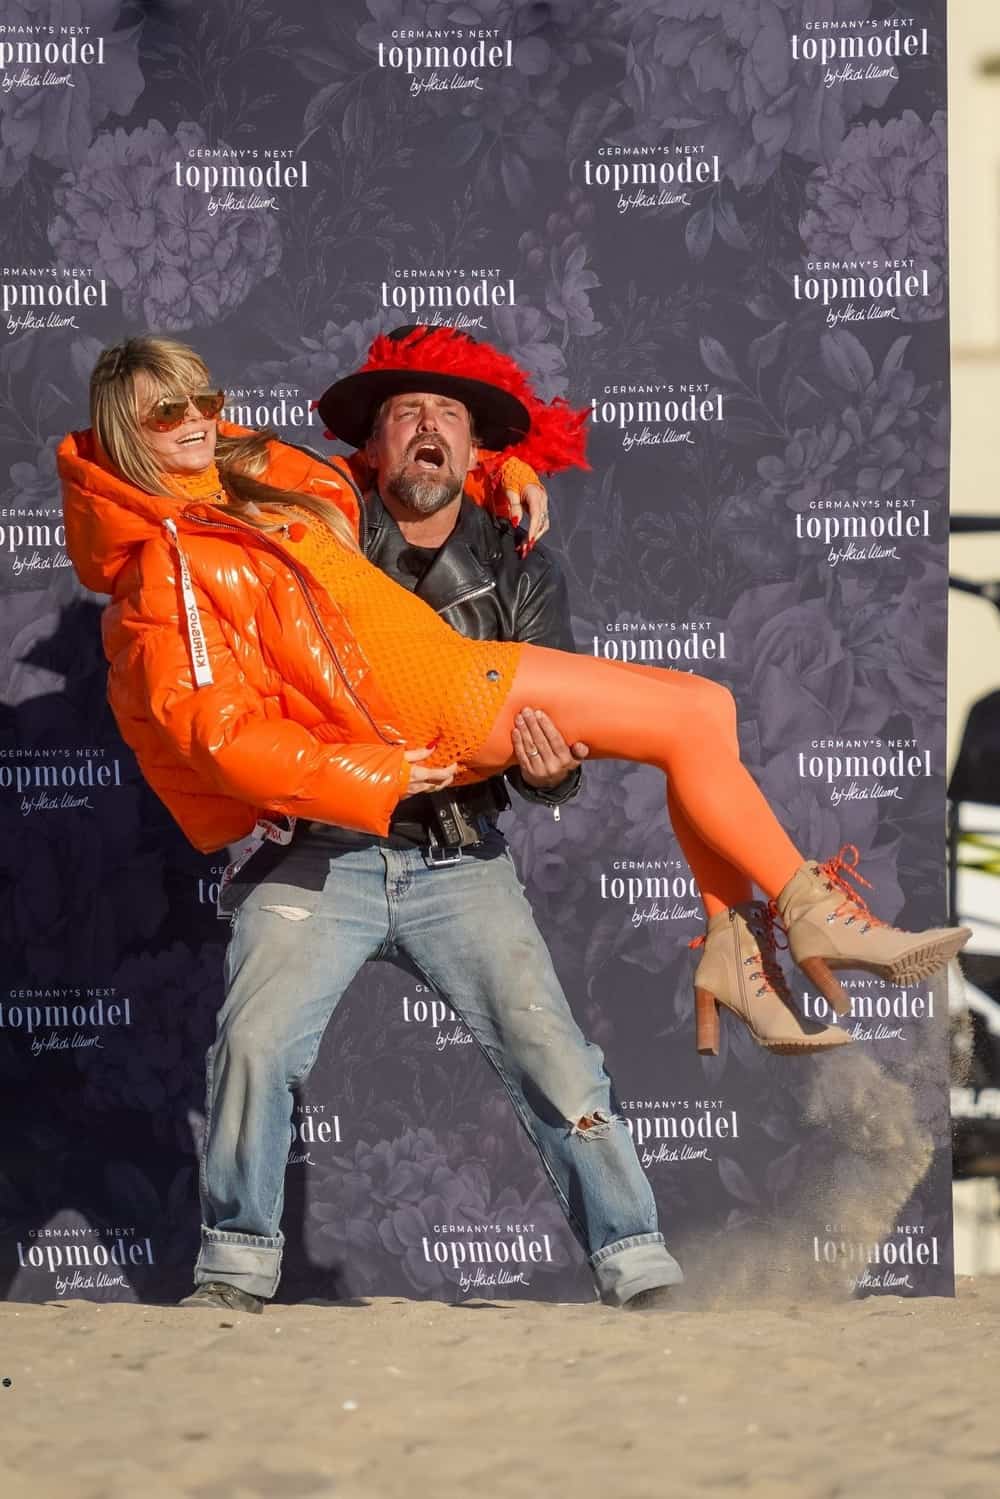 Heidi Klum Rocks an All-orange Outfit on the Set of Germany's Next Top Model